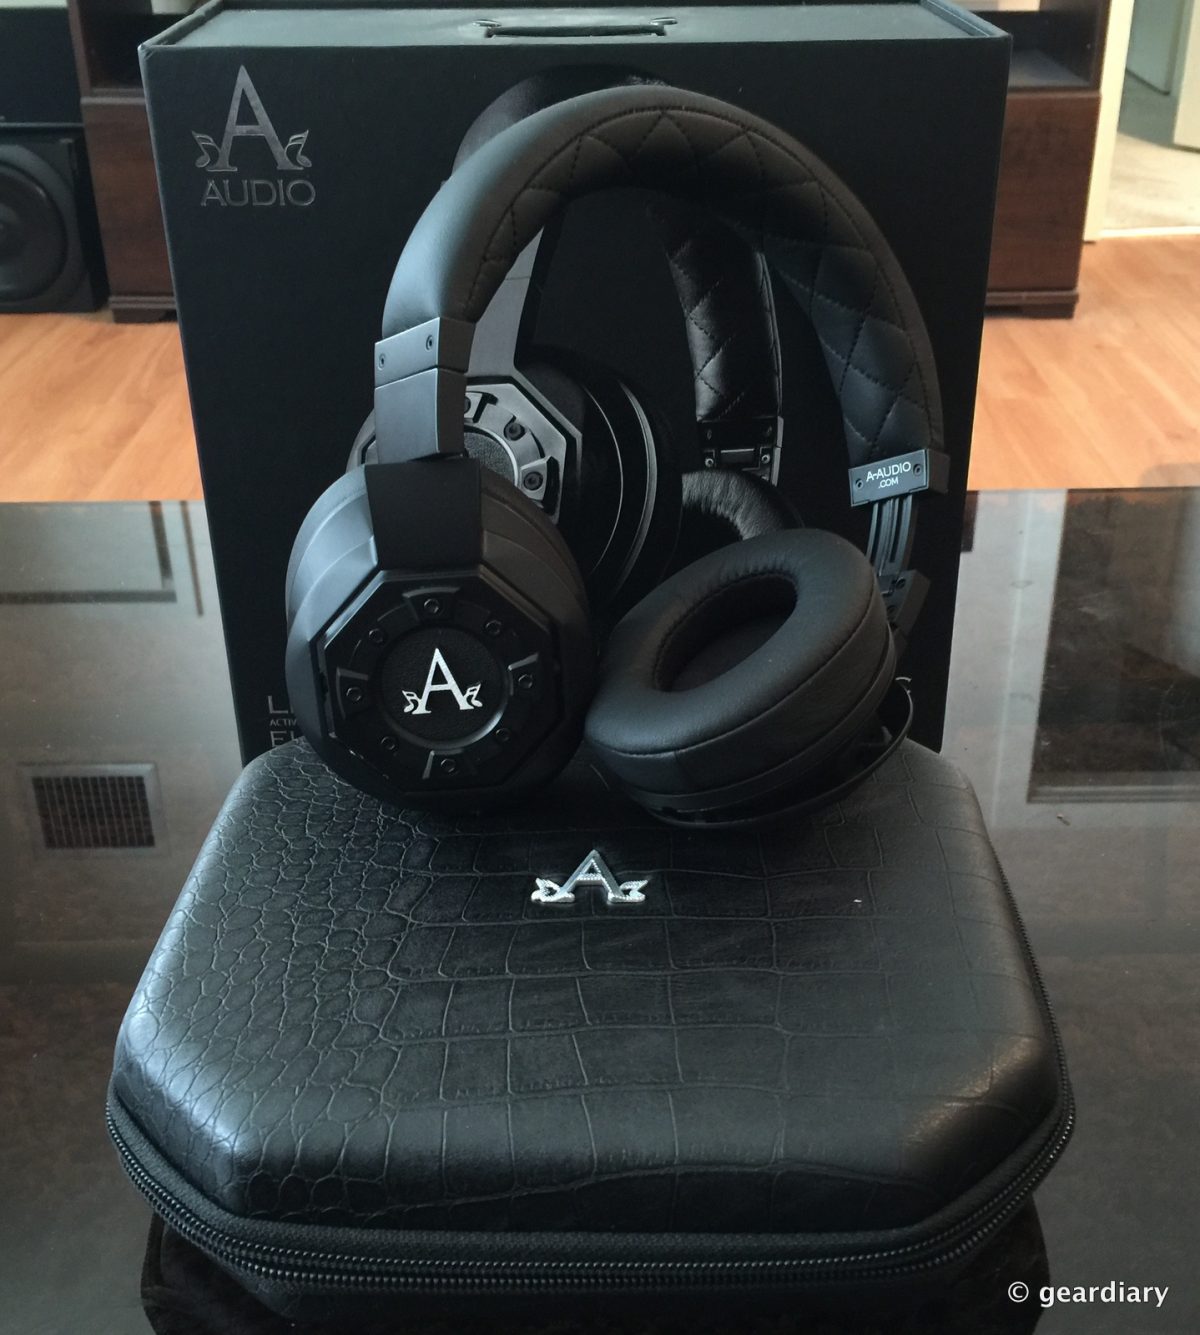 A-Audio's Legacy Headphones Should've Been Bluetooth, but Are Still a Corded Success